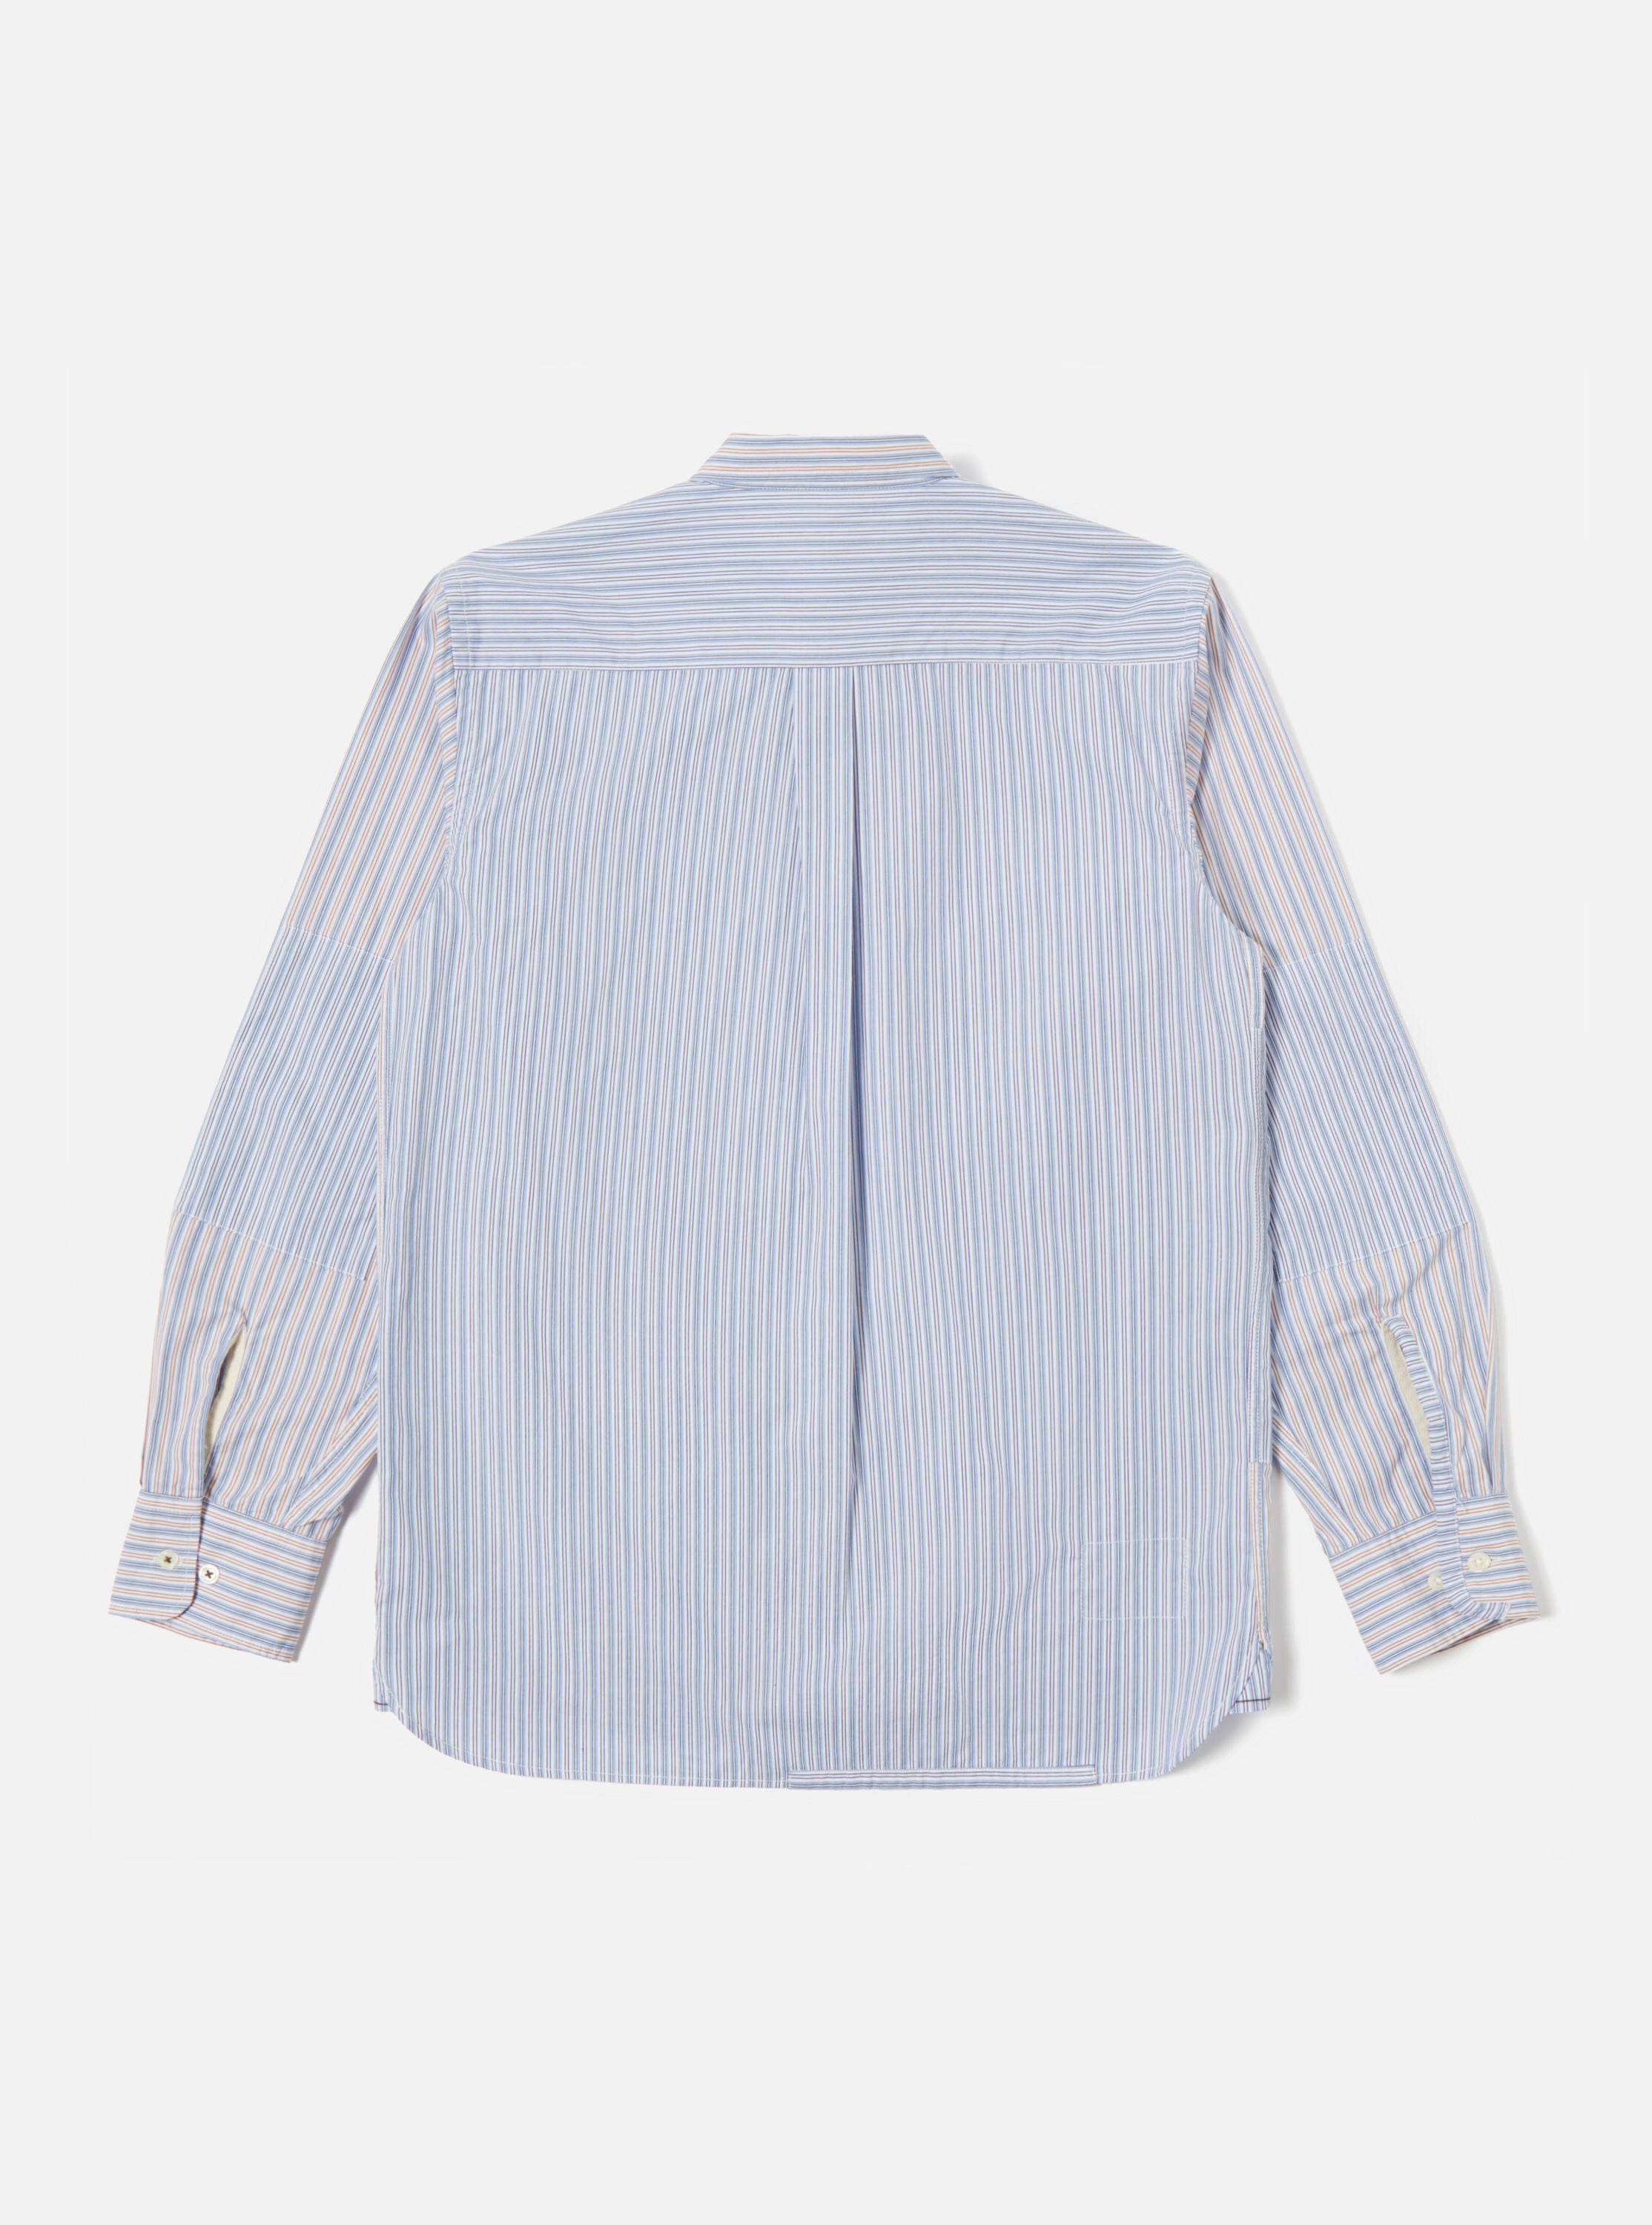 Universal Works Patched Shirt in Blue Stripe Busy Stripe Cotton